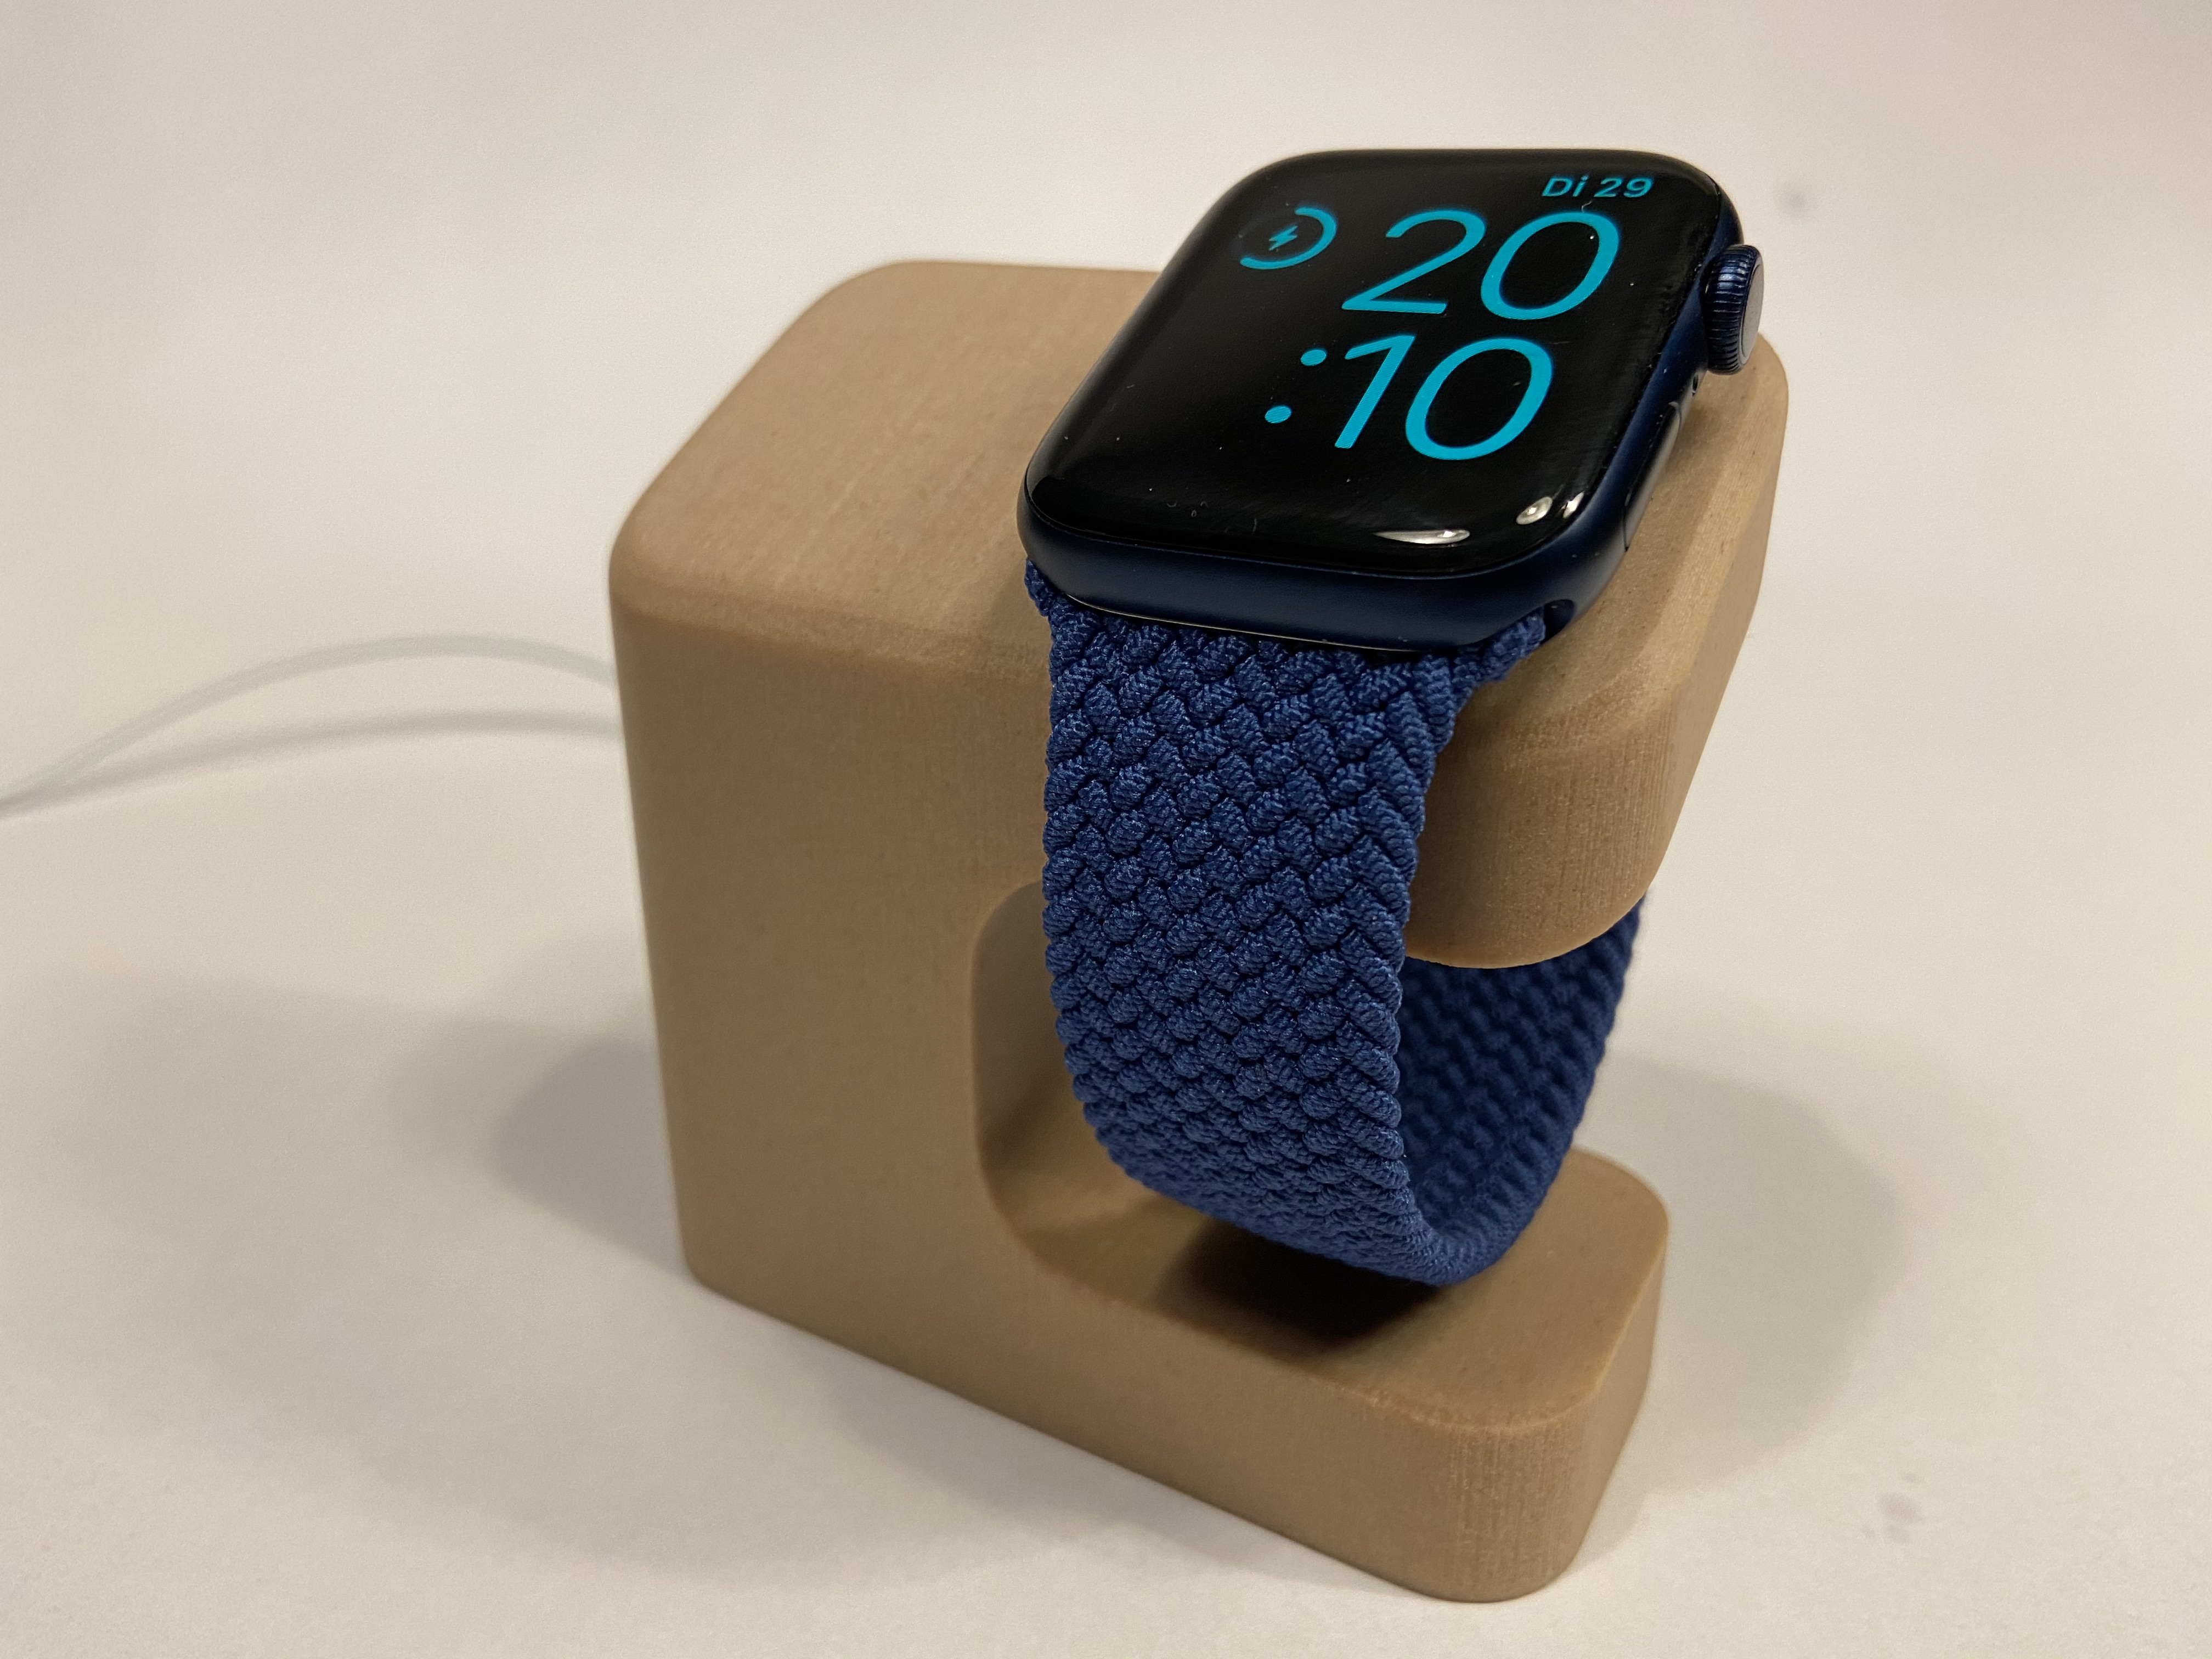 Docking station for Apple Watch